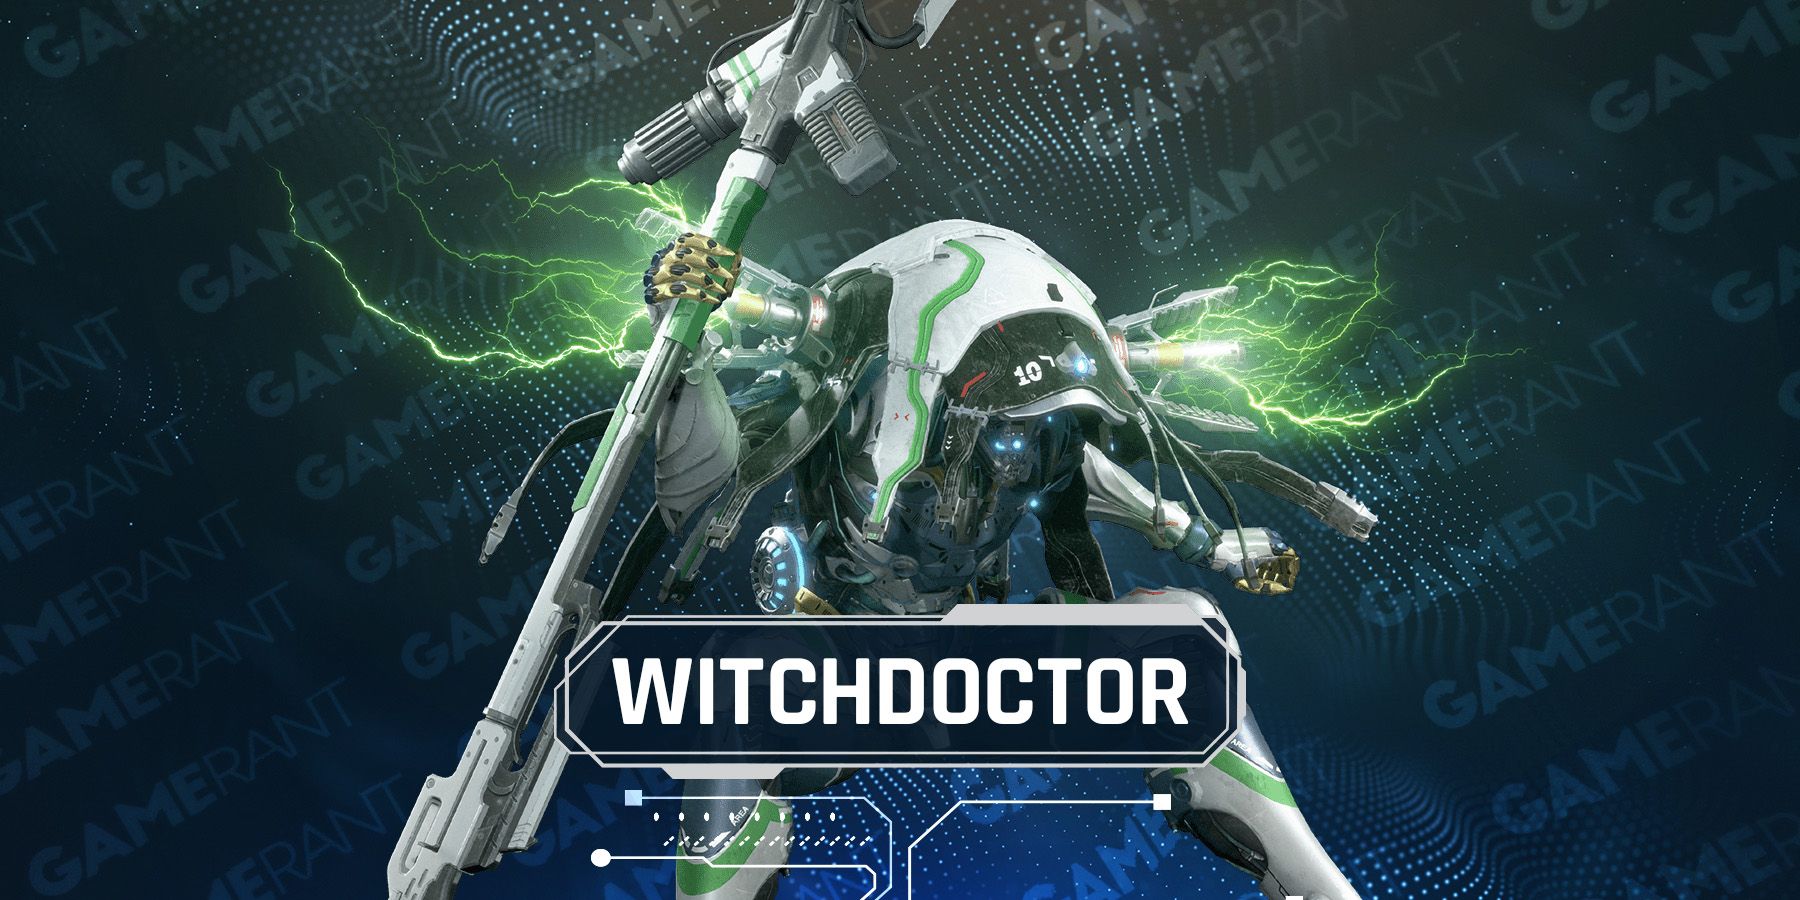 Exoprimal: A Complete Guide To The Witchdoctor Exosuit